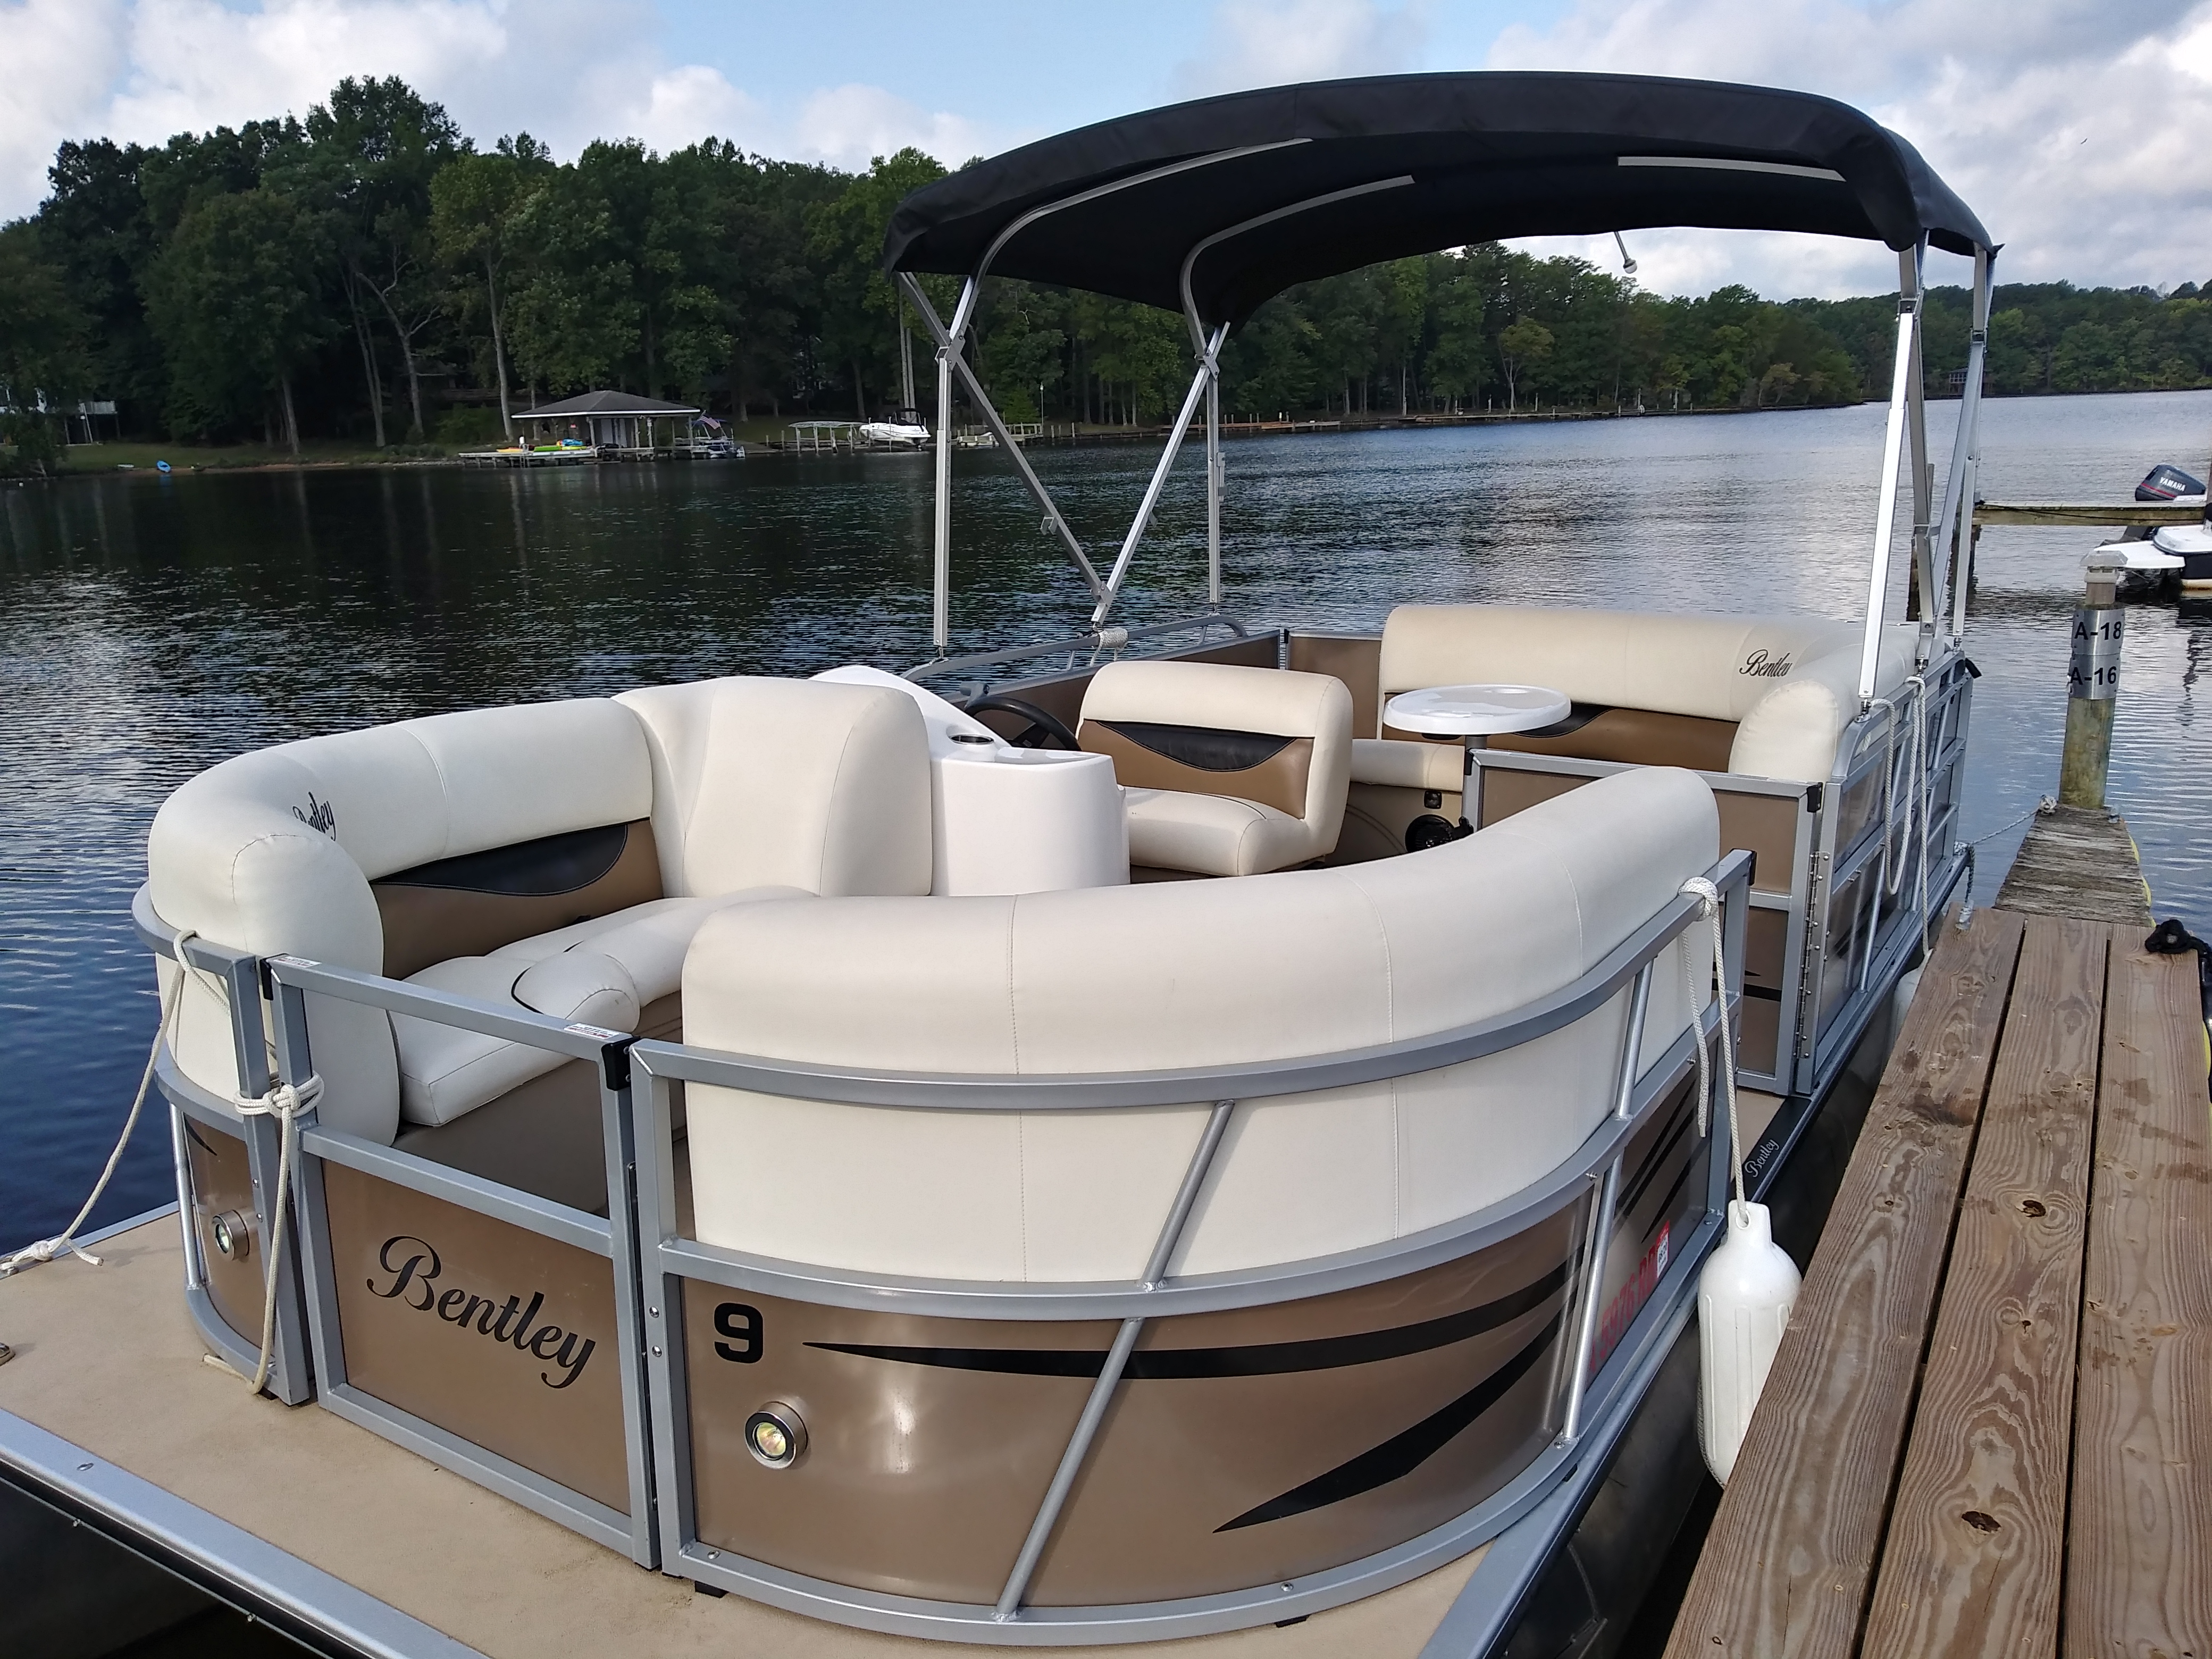 To see why the very best pontoon boats take shape at manitou